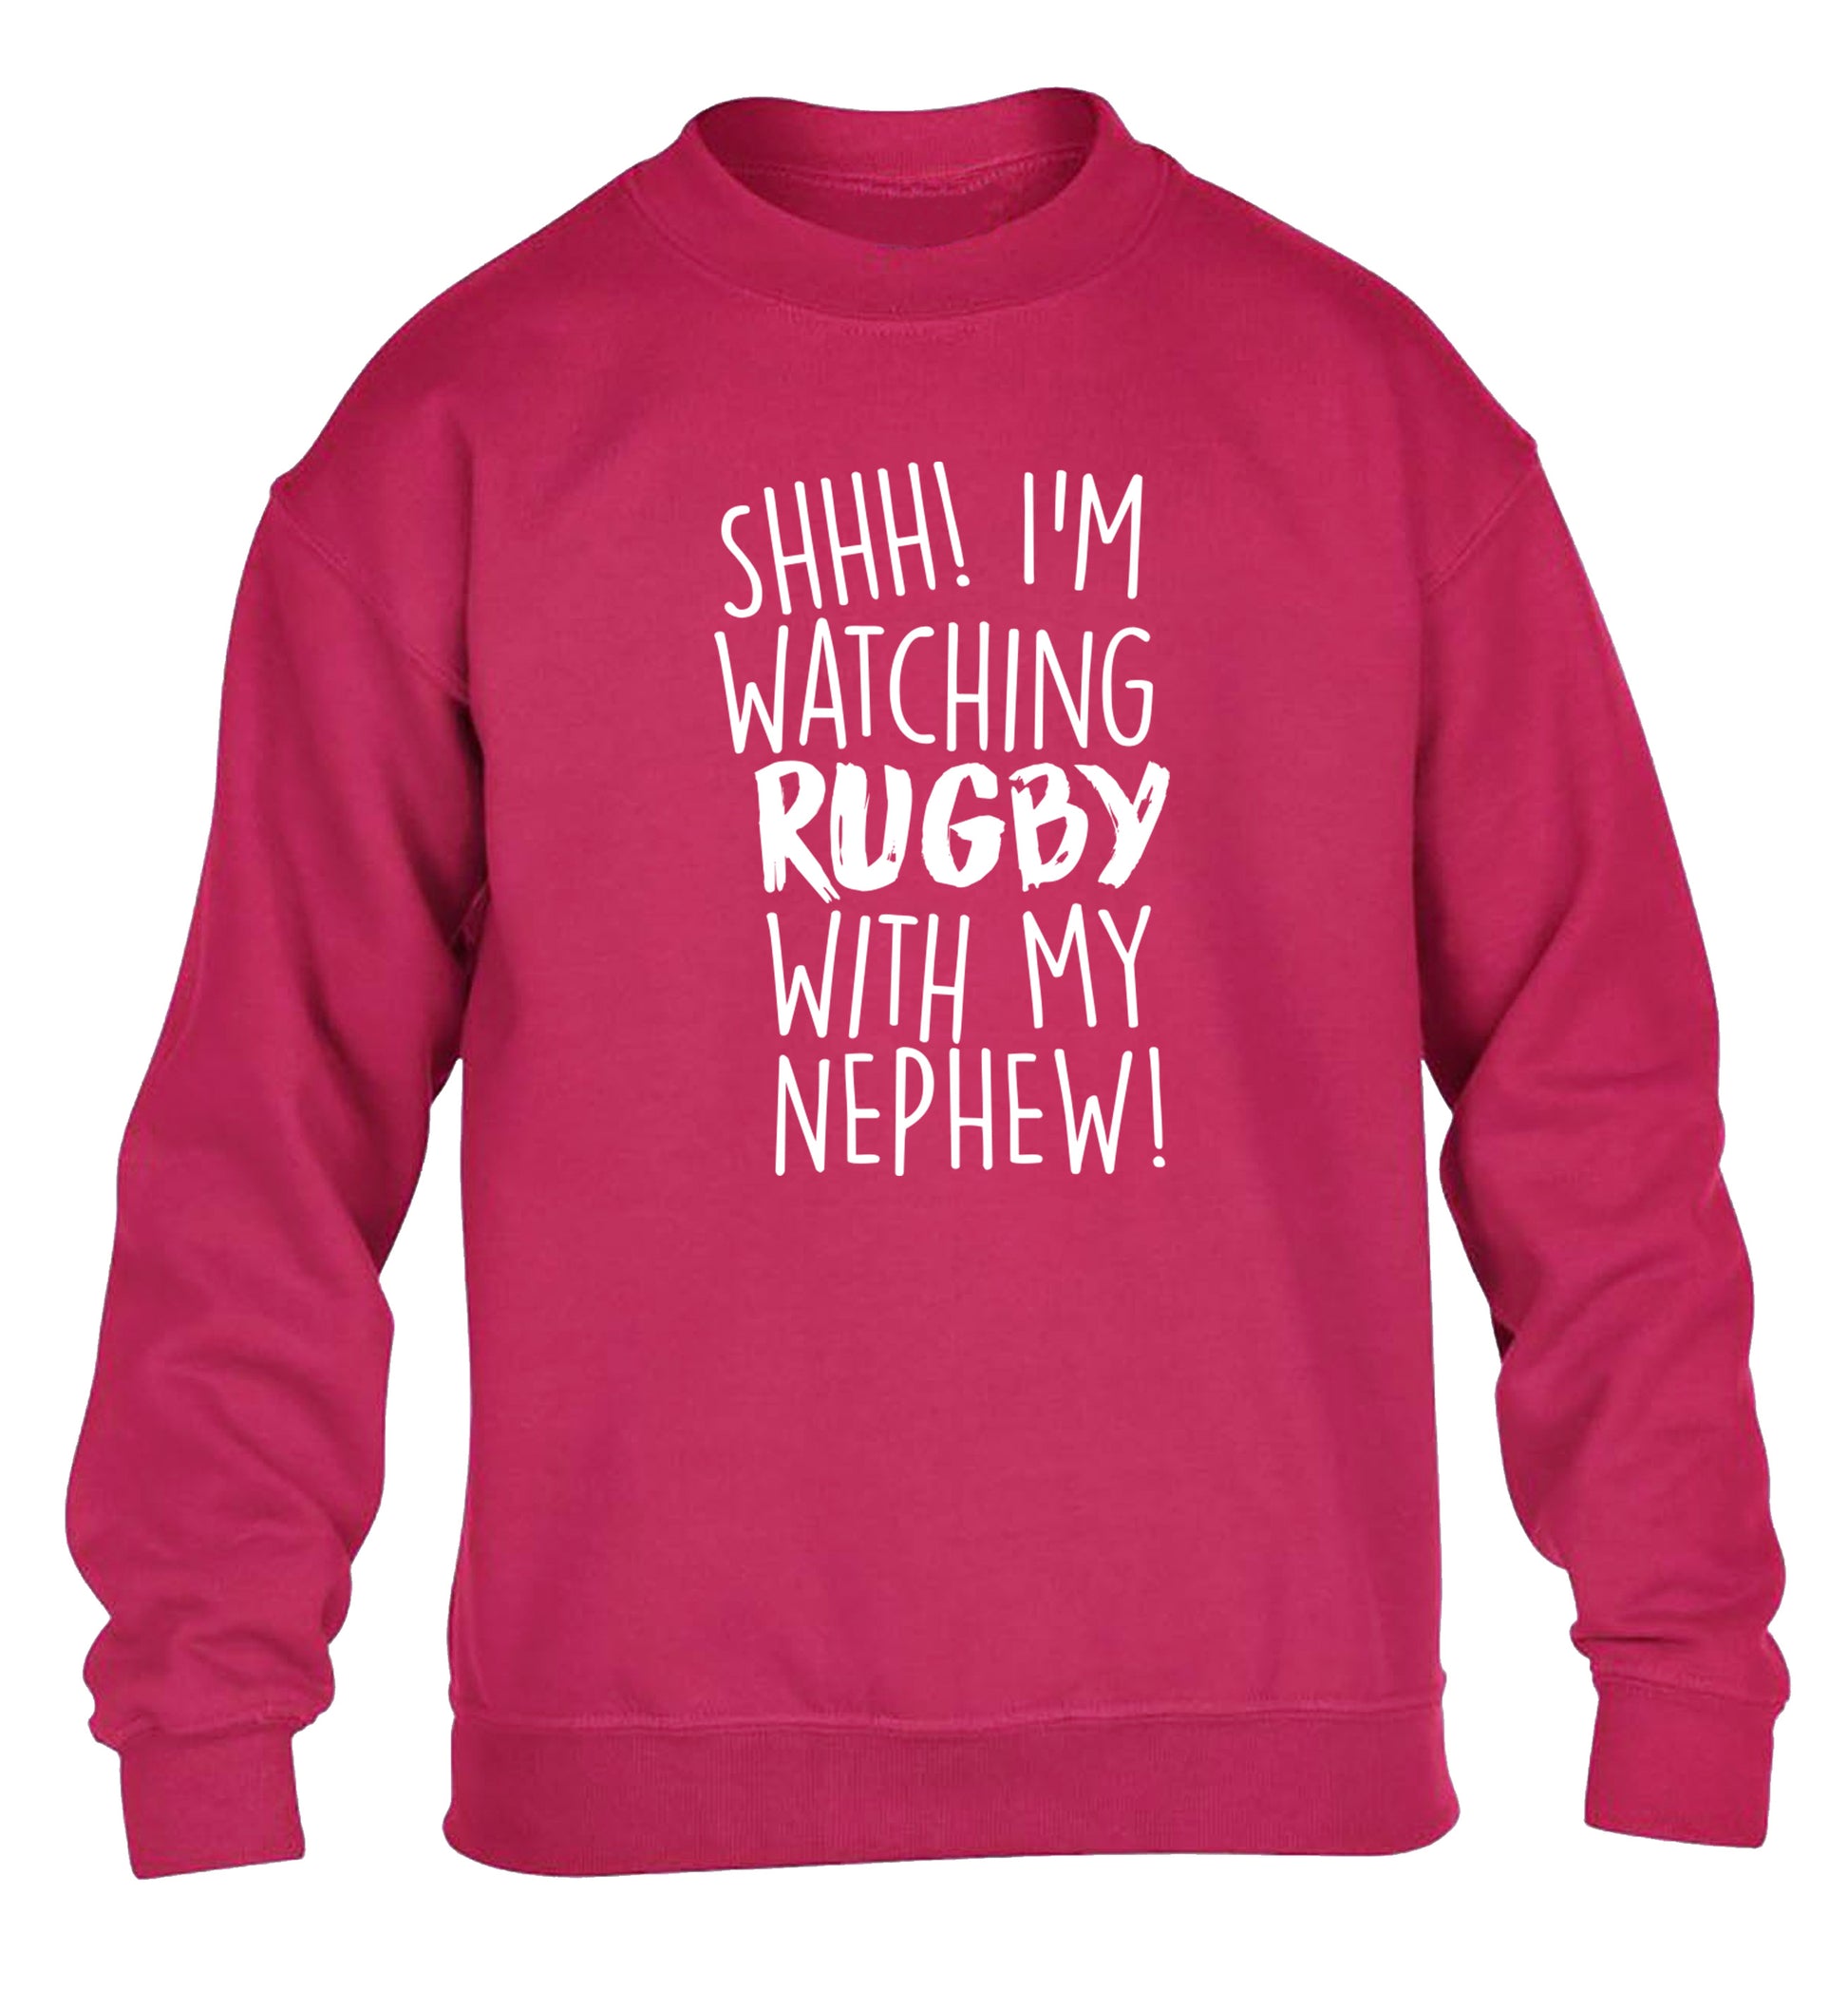 Shh.. I'm watching rugby with my nephew children's pink sweater 12-13 Years